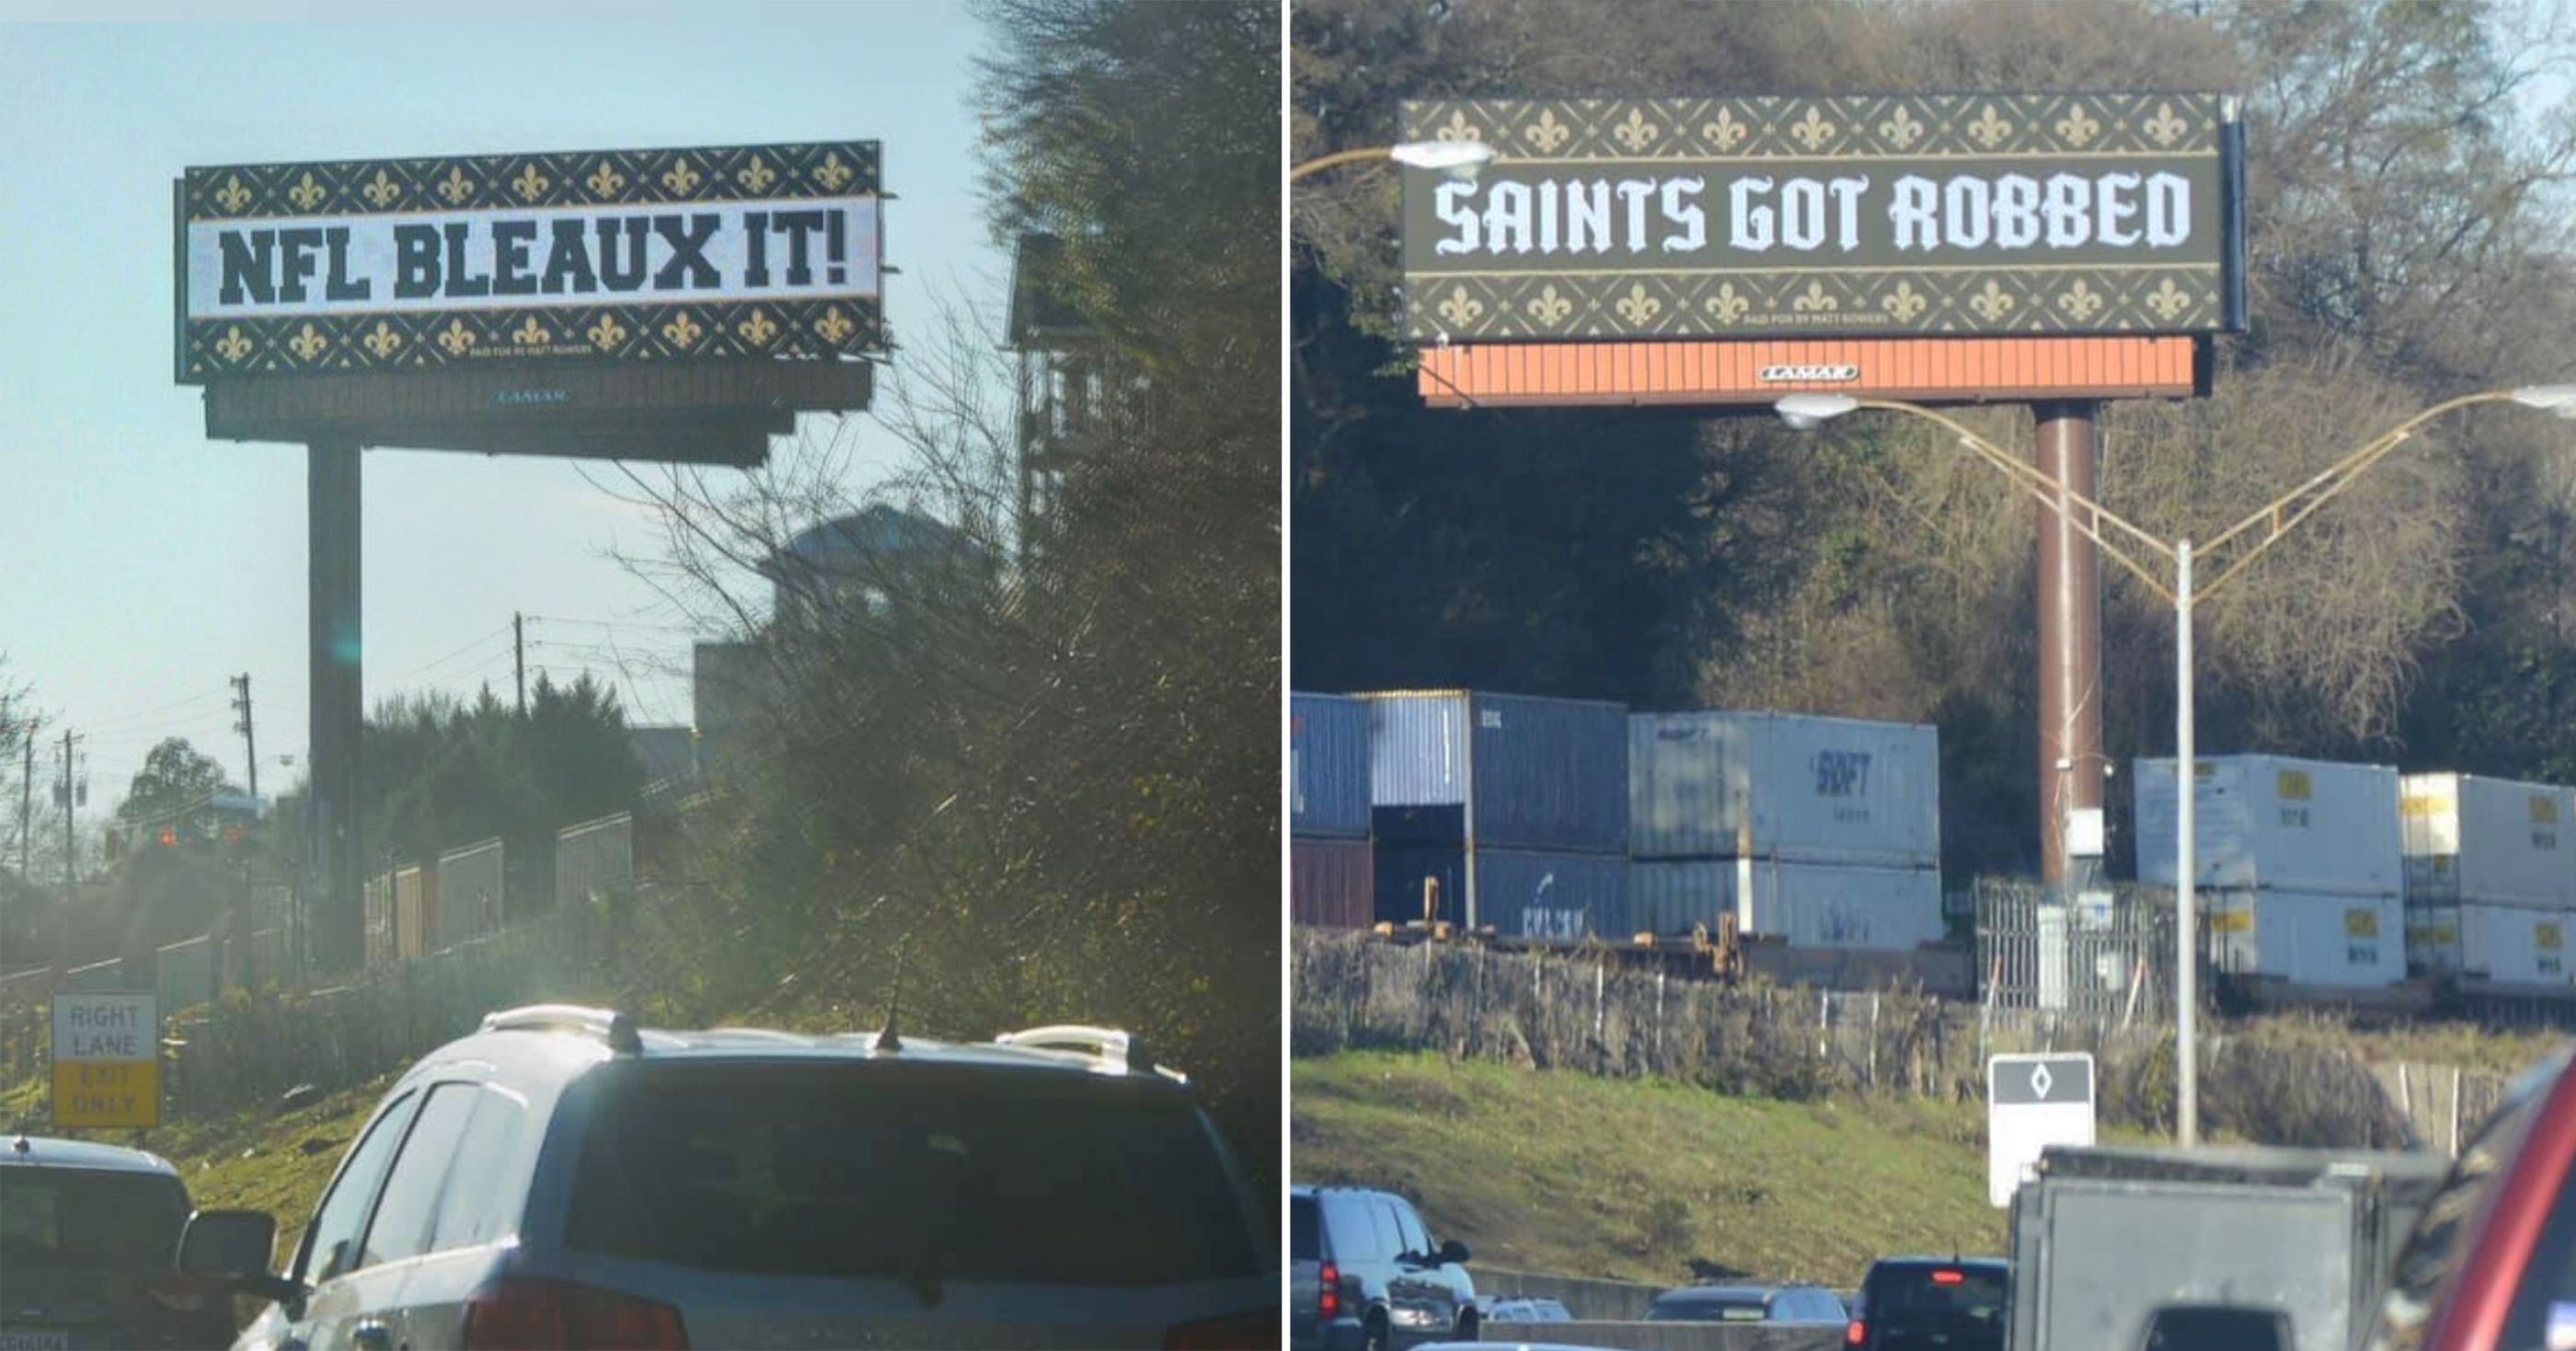 Polo And Princess Peach Daisy Lesbian Porn - Saints Fans Buying Billboards Around Super Bowl Site In ...